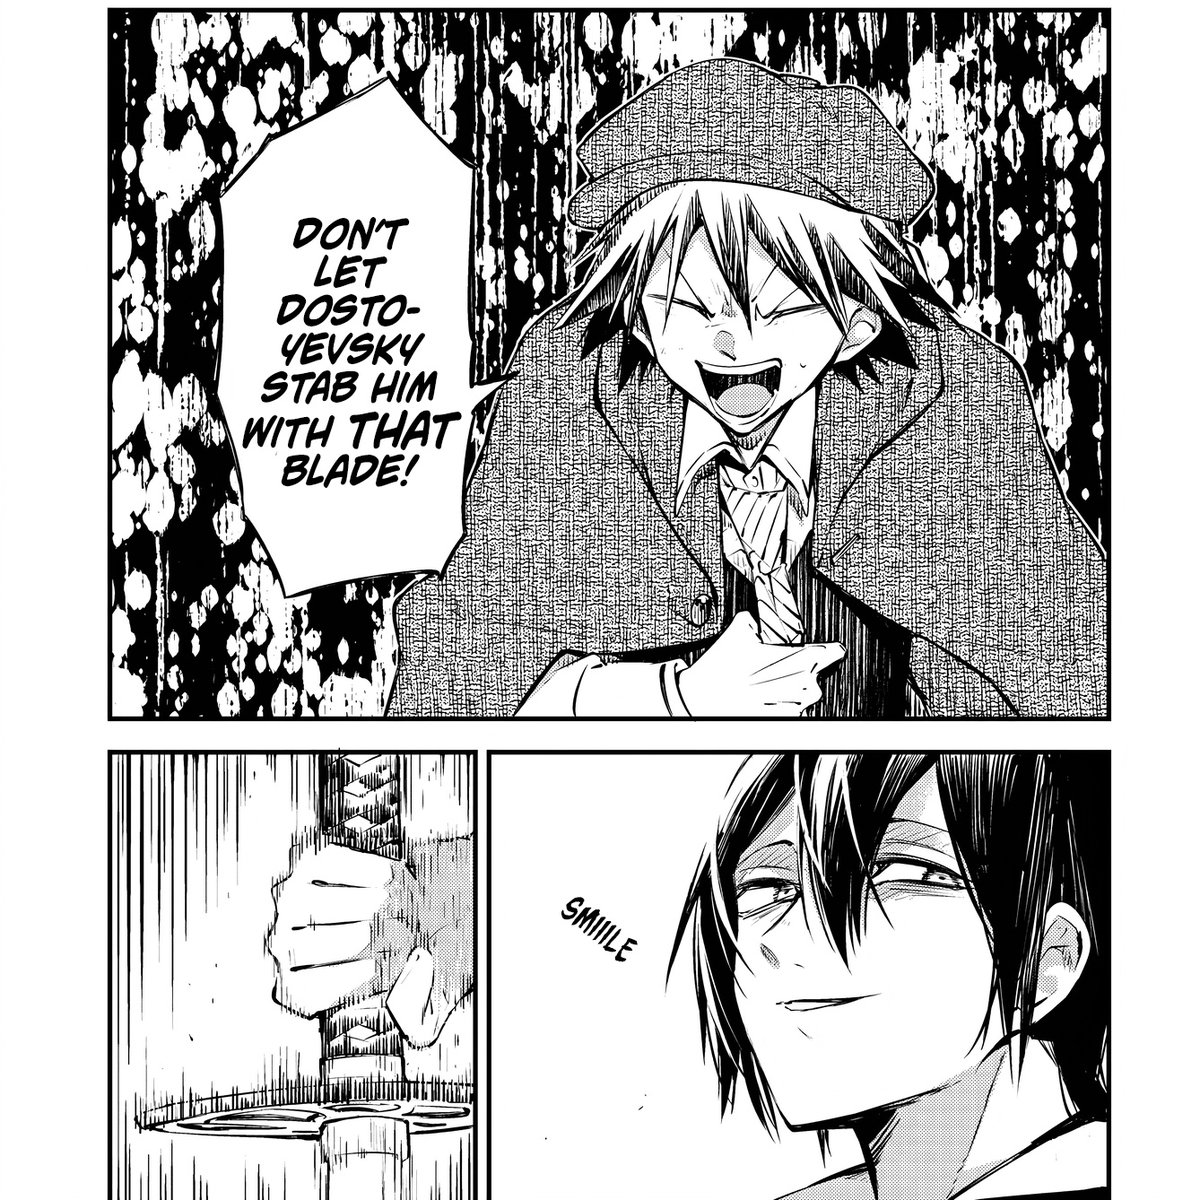 RANPO AND FYODOR FINALLY GOT TO MEET FACE TO FACE OH MY GOD!!!!!